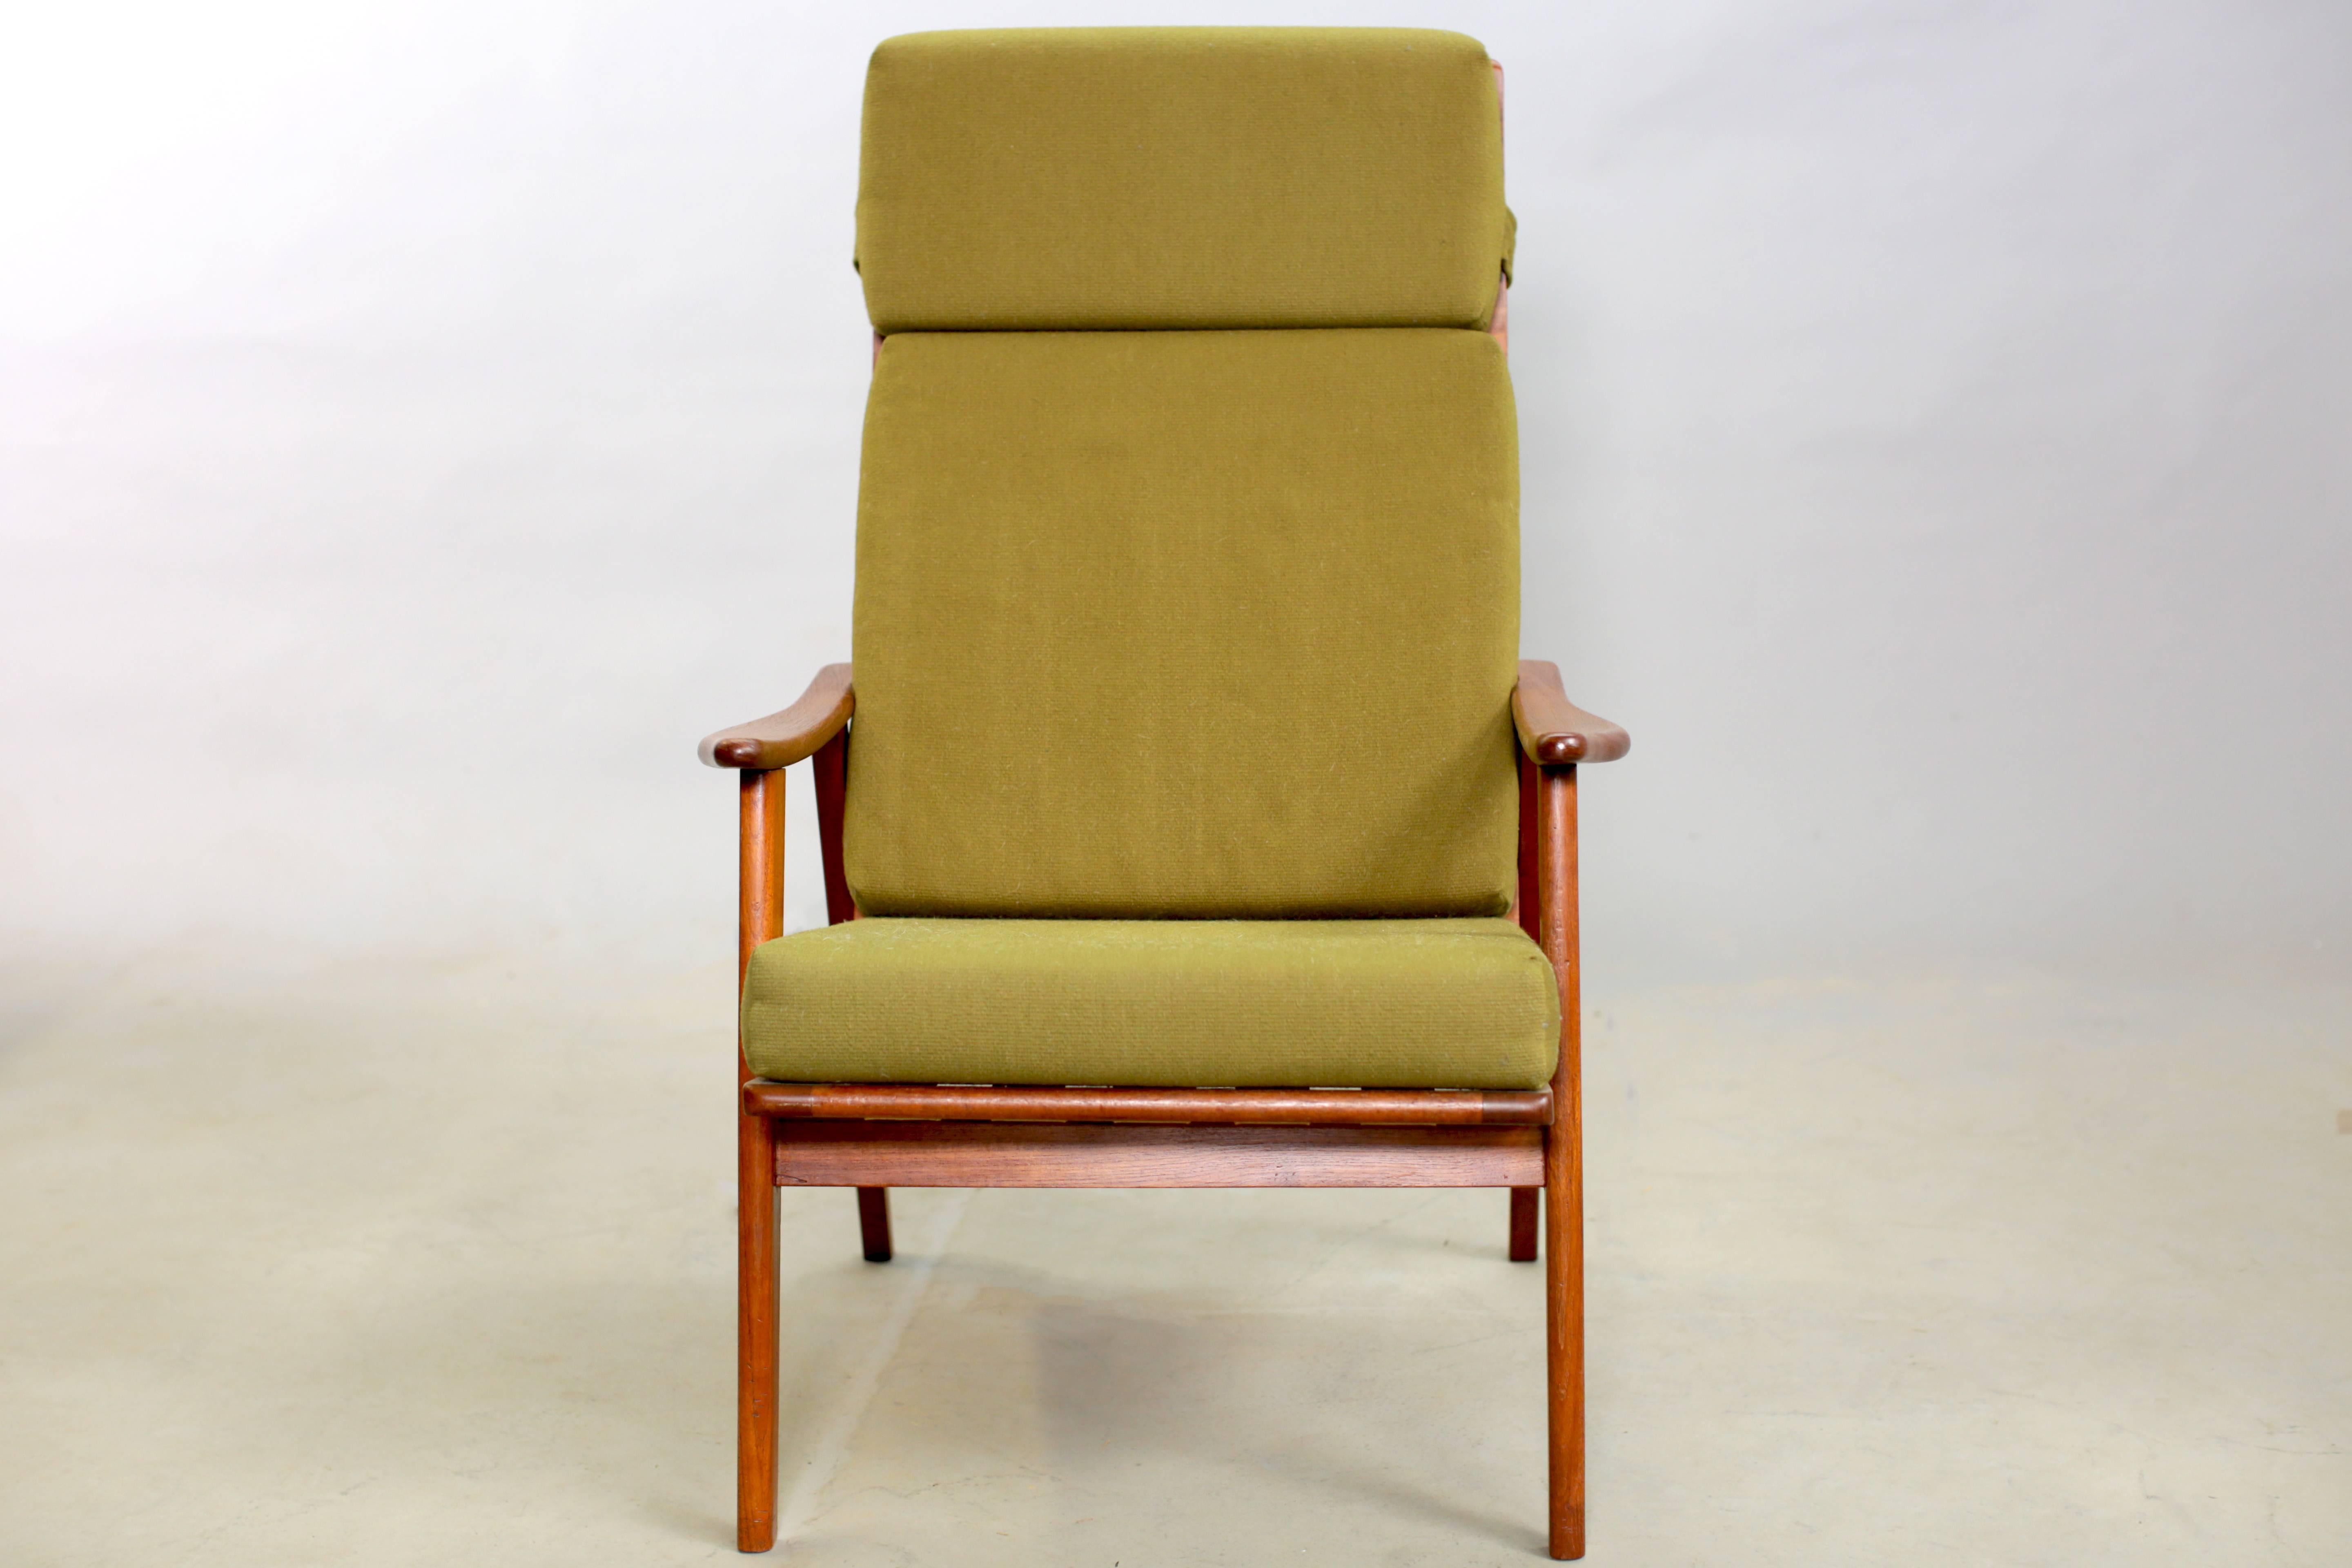 Vintage 1950s Mid Century Arm Chair

This wood framed chair is in excellent condition but the fabric needs to be changed. Luckily we offer upholstery services so choose your fabric, any fabric and we'll get it set up for you. Ready for pick up